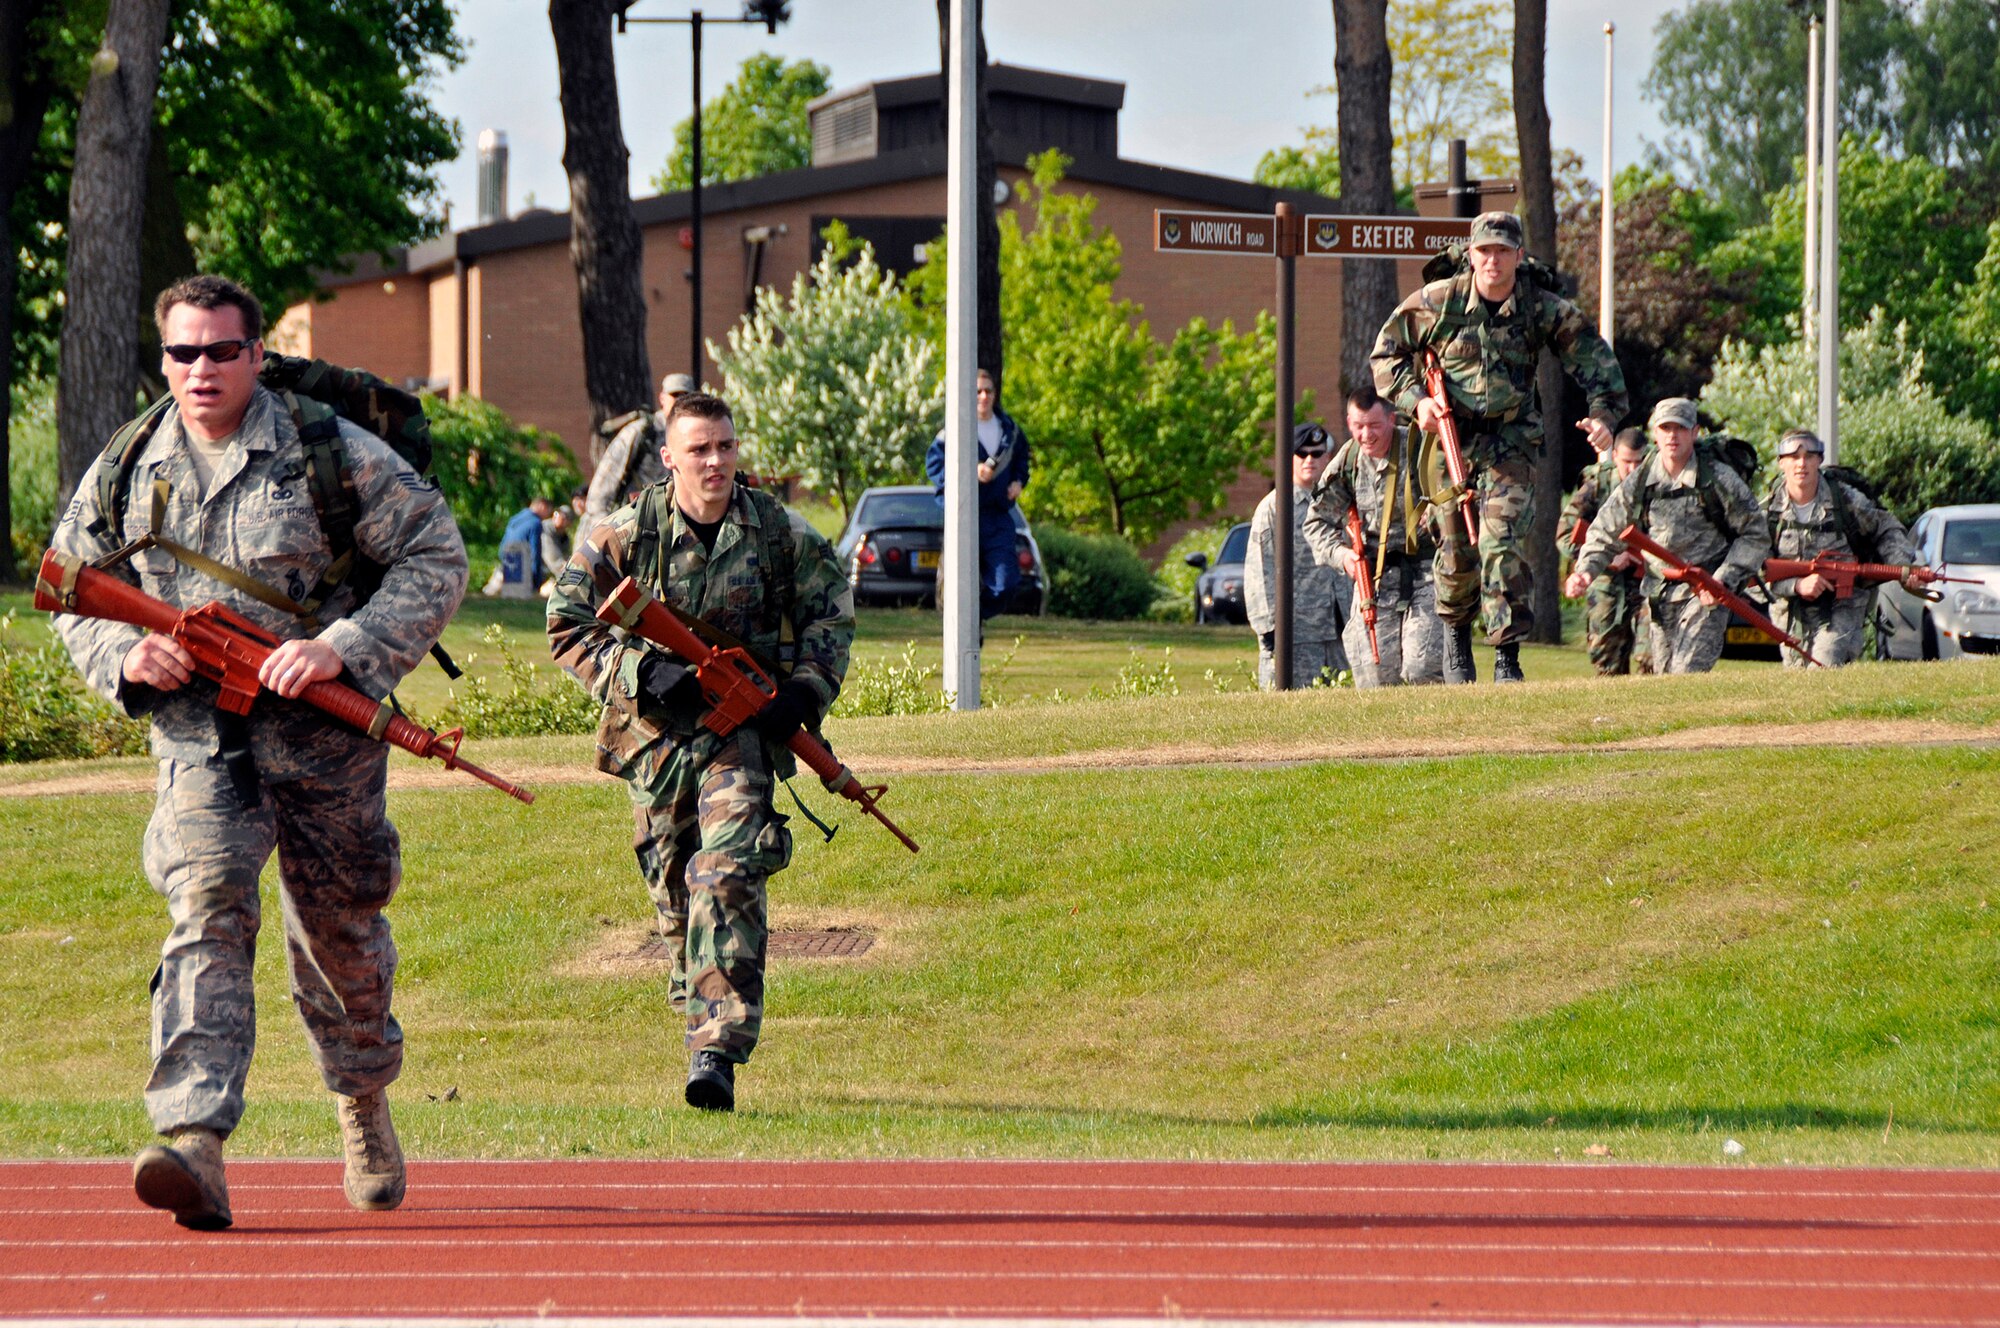 ROYAL AIR FORCE LAKENHEATH, England -- Airmen move to the litter carry checkpoint during the 5K Ruck March May 11, 2009. The litter carry was the last obstacle during the 5K Ruck March apart of The National Police Week.  (U.S. Air Force photo by Airman 1st Class Perry Aston)